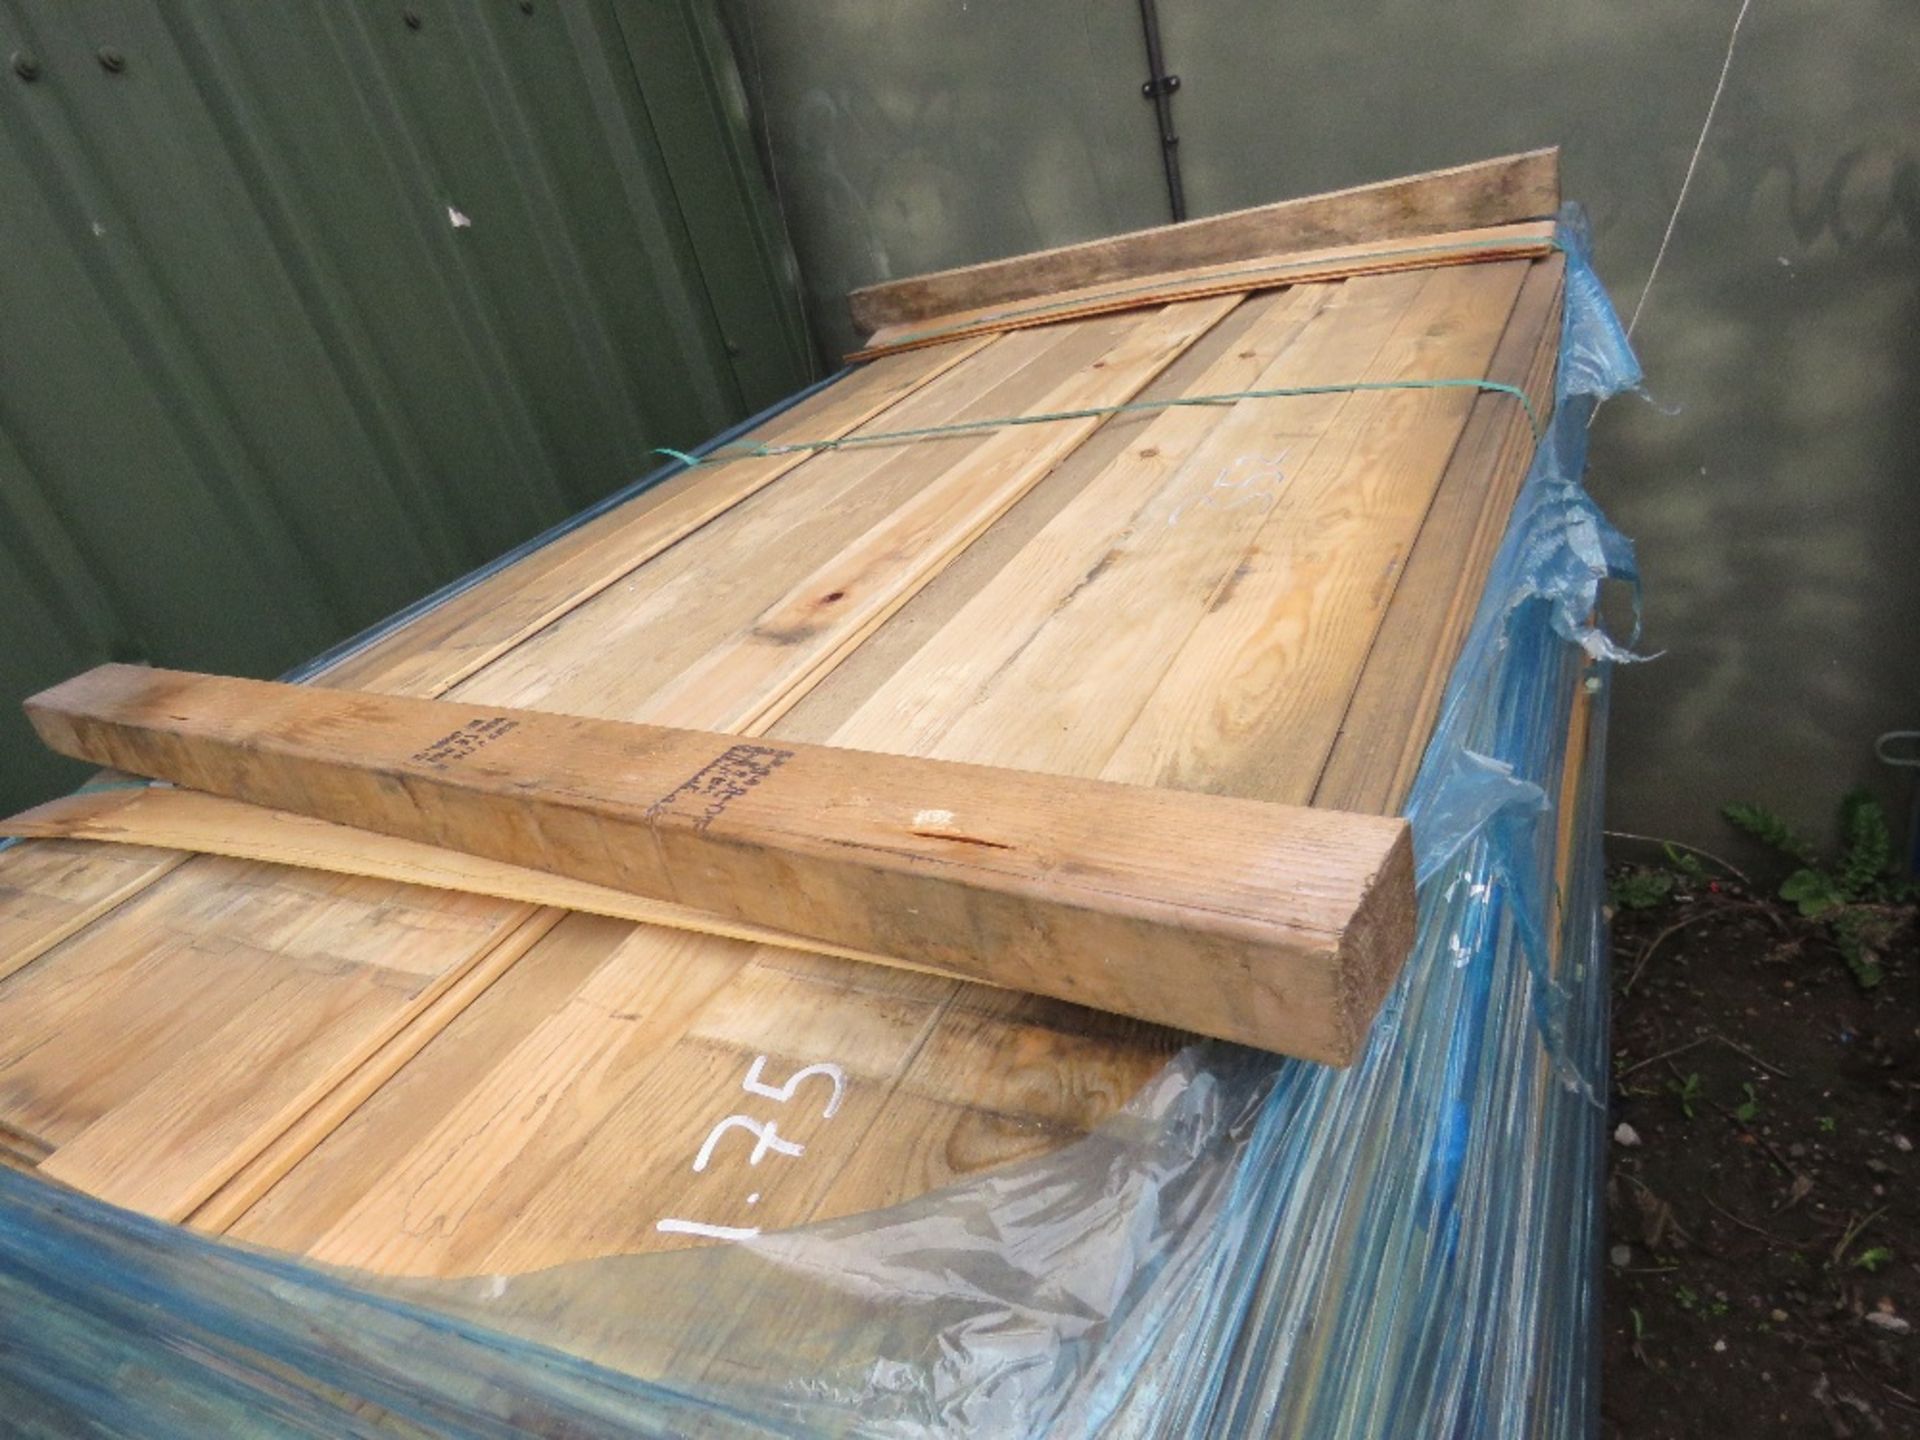 STACK OF 2 X BUNDLES OF BOARDS 1.75M LENGTH APPROX. - Image 2 of 3